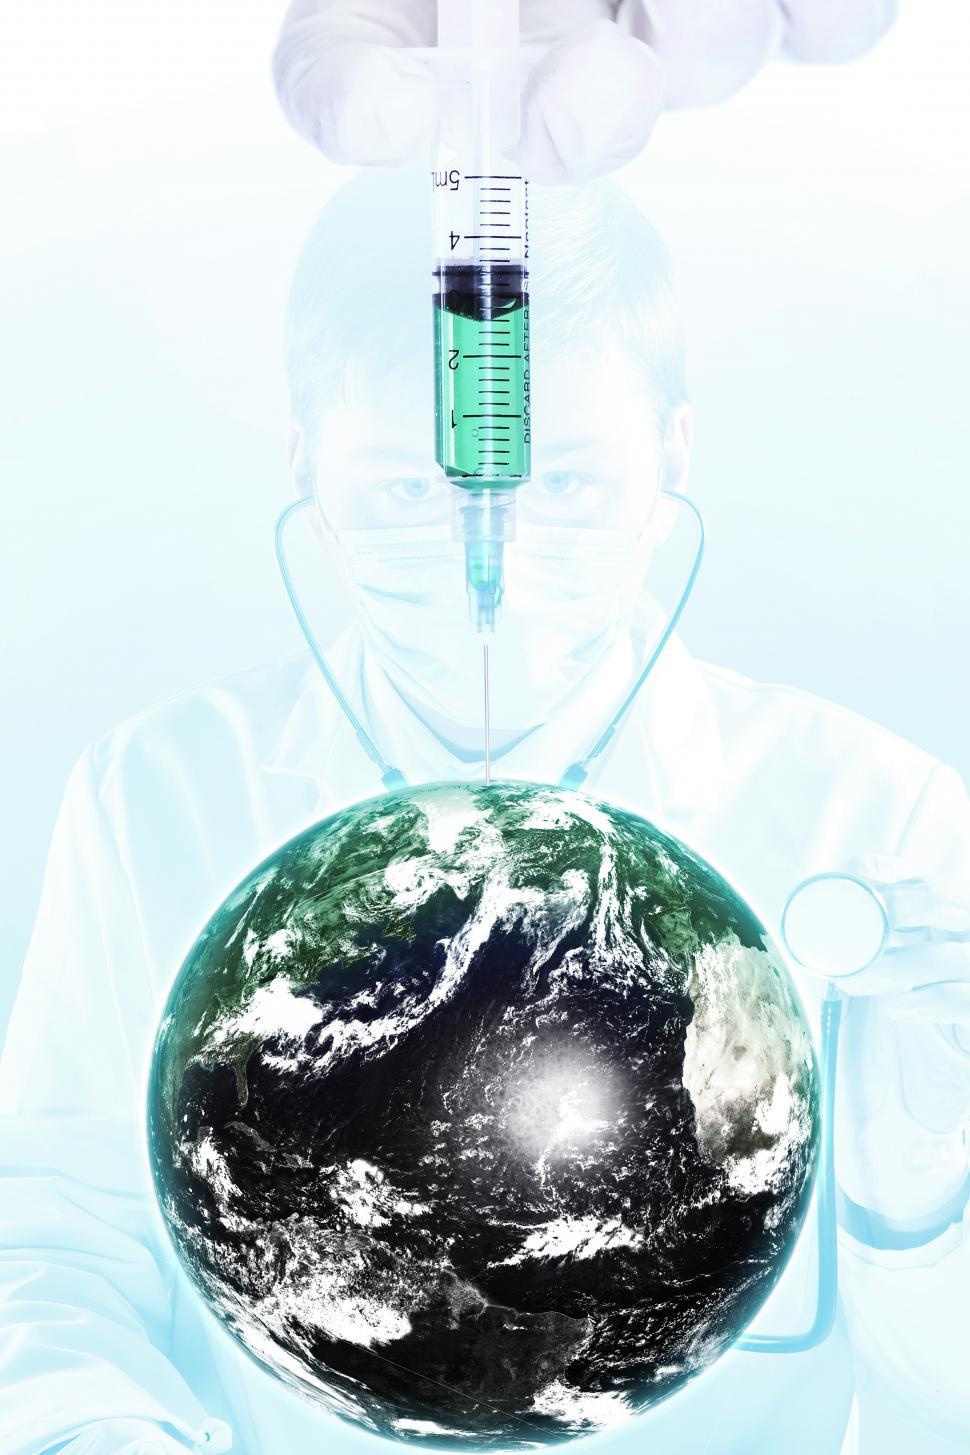 Free Image of Earth health - planet and needle 